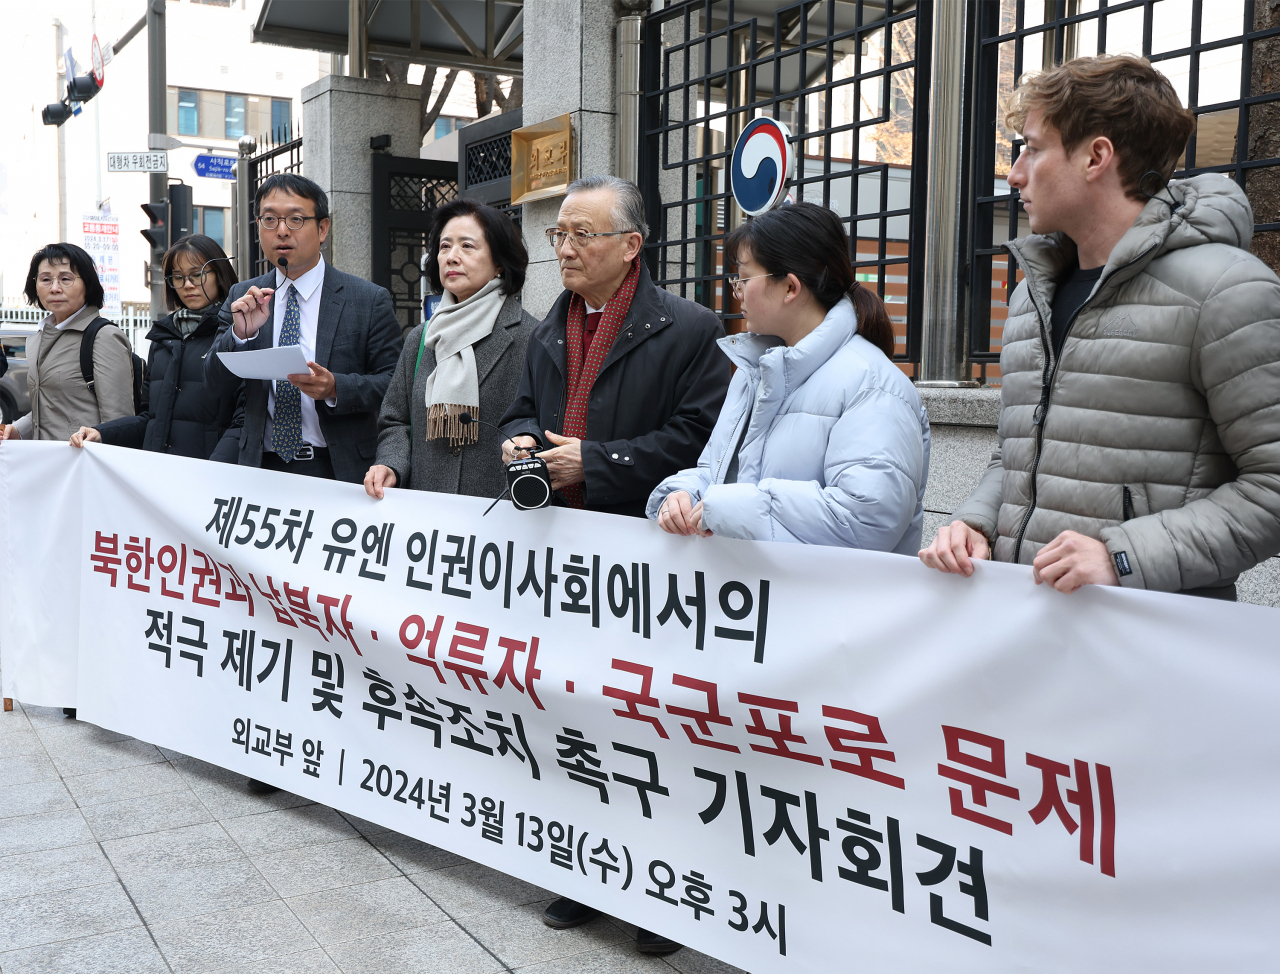 Human rights activists holds a press conference in front of Seoul's foreign ministry building to call for the government to actively raise the issue of South Koreans abducted and detained in North Korea as well as prisoners of wars at the session of the UN Human Rights Council, Wednesday. (Yonhap)